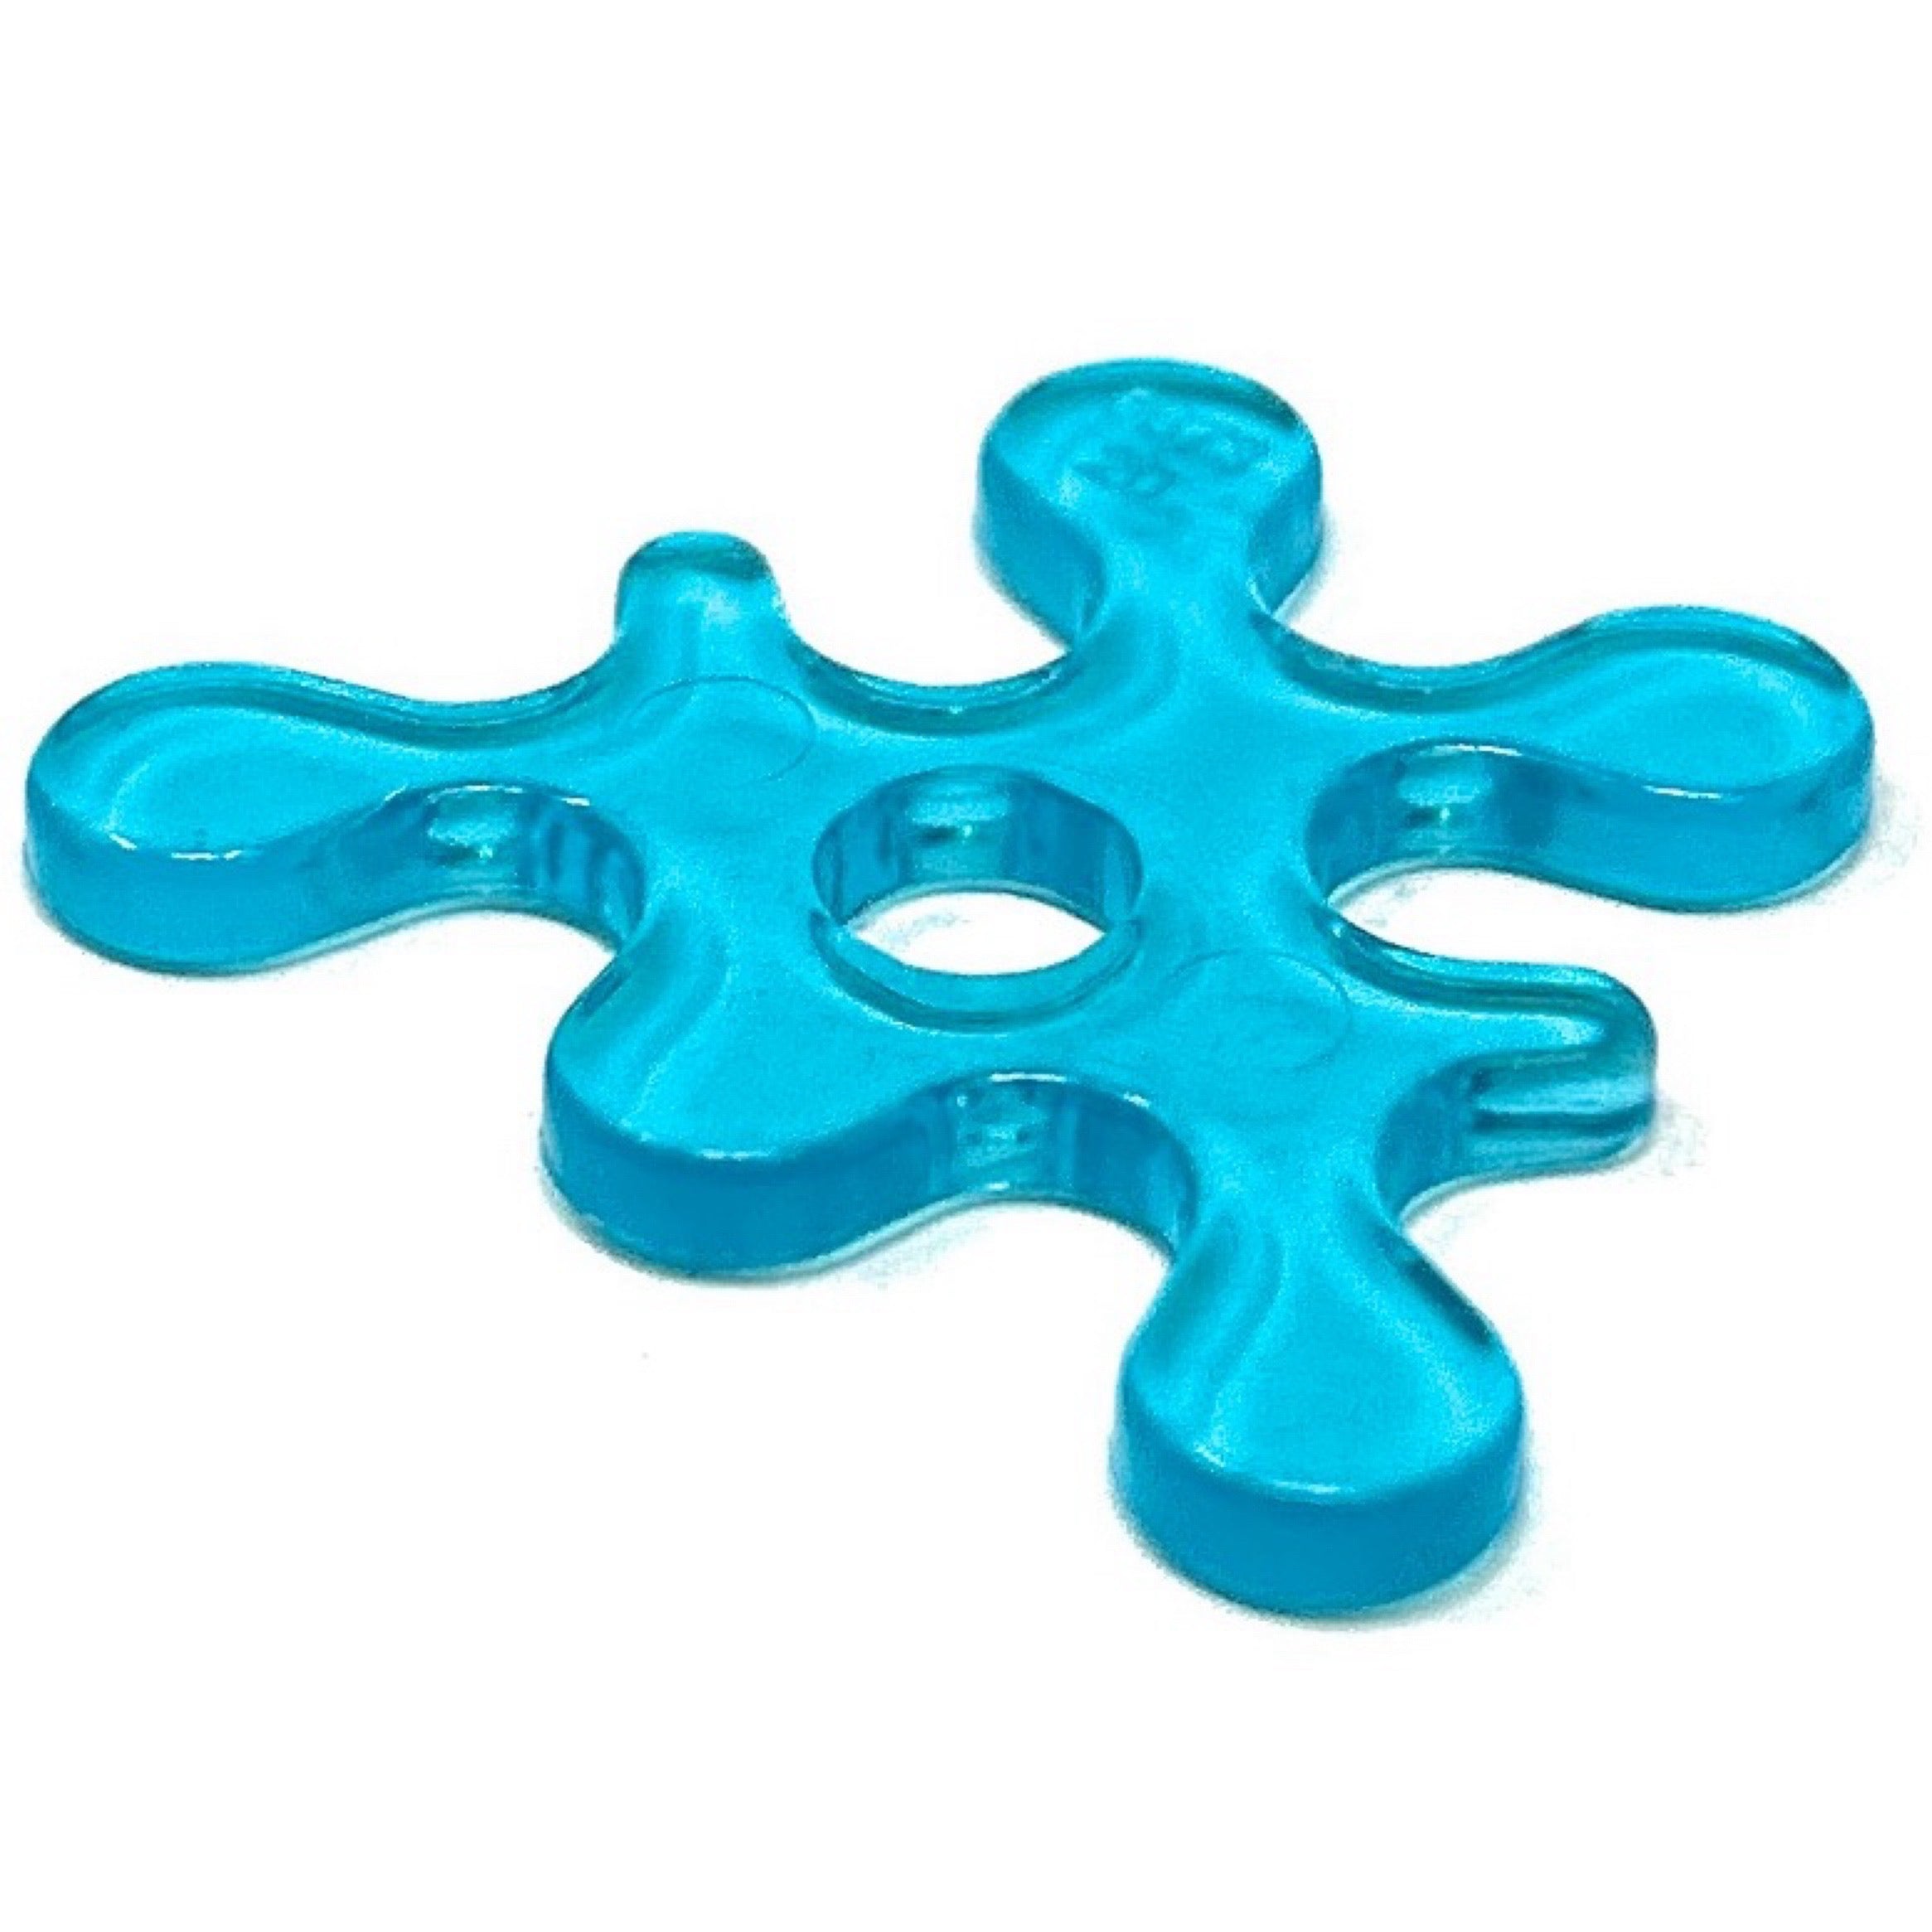 Water Spill / Splat - LEGO Compatible